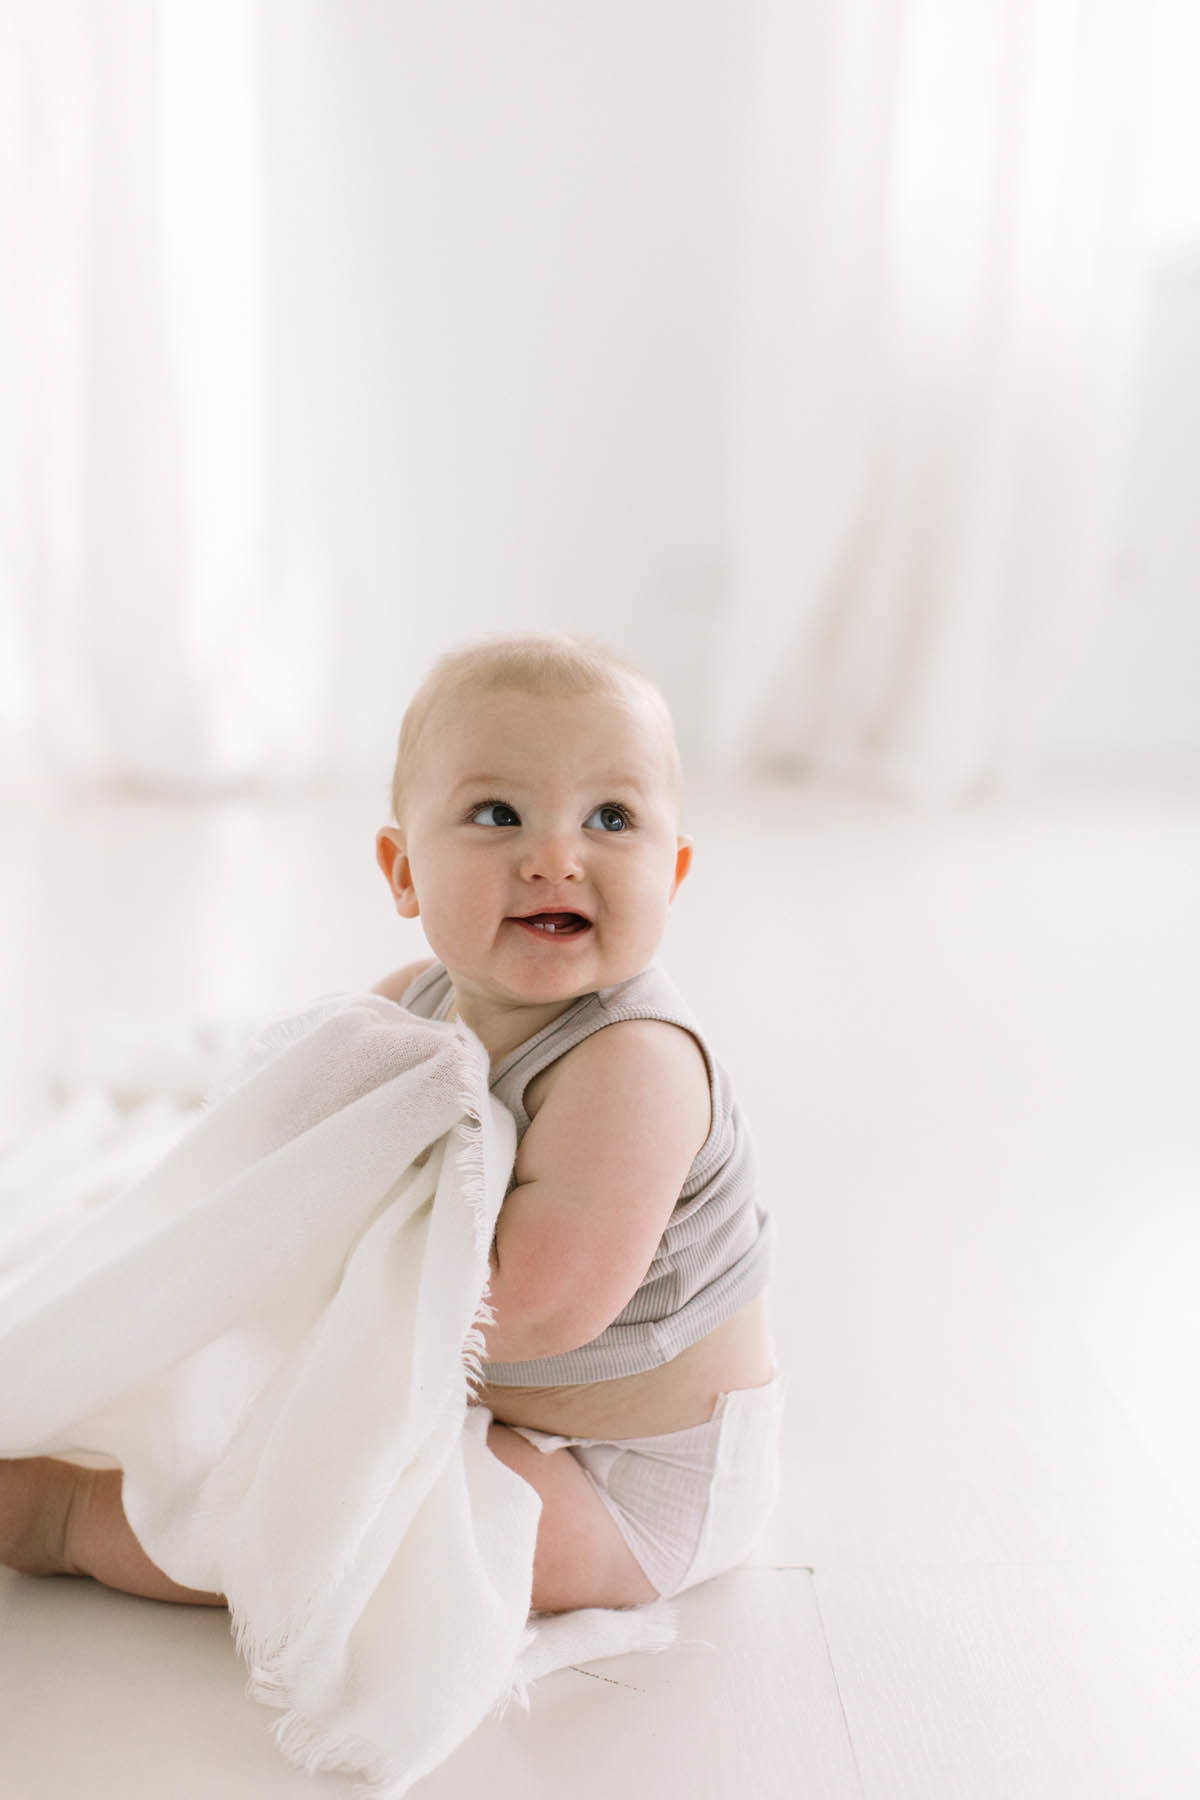 Chicago baby photographer | Elle Baker Photography